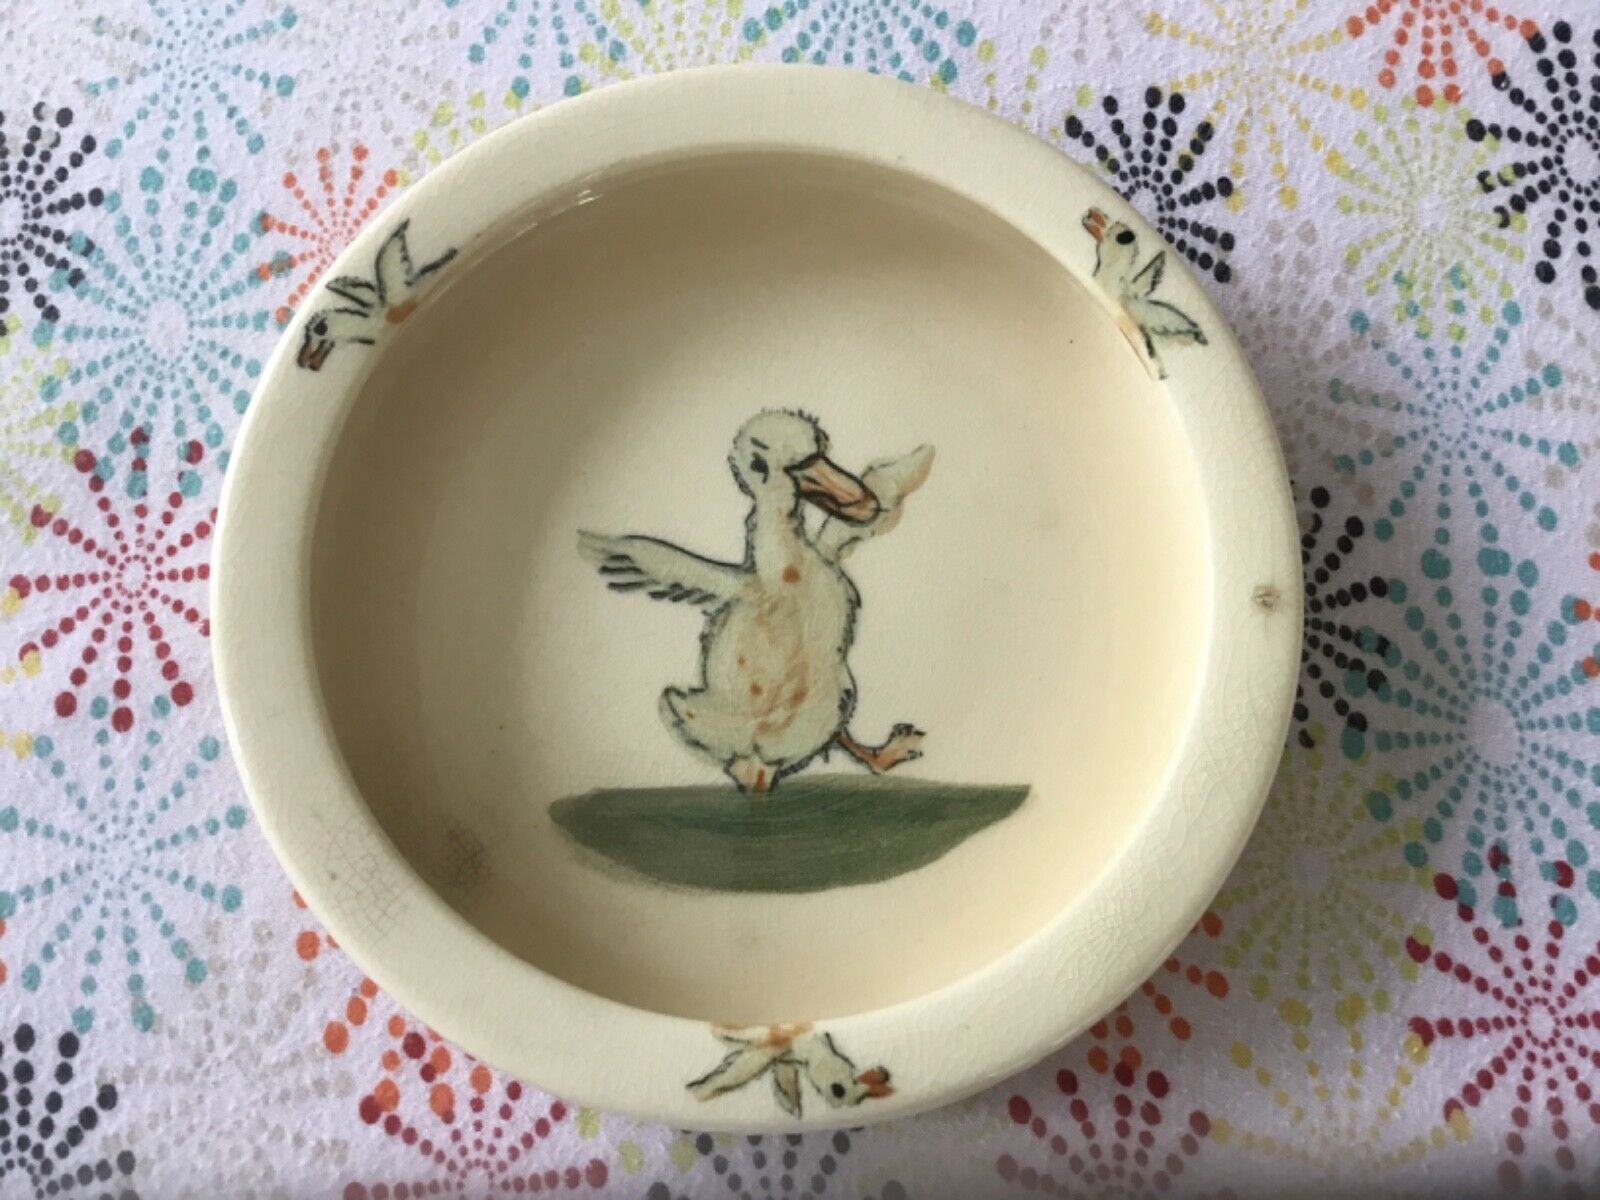 1920s Weller Ware Child\'s Bowl with Ducks Antique Baby Dish Good Condition